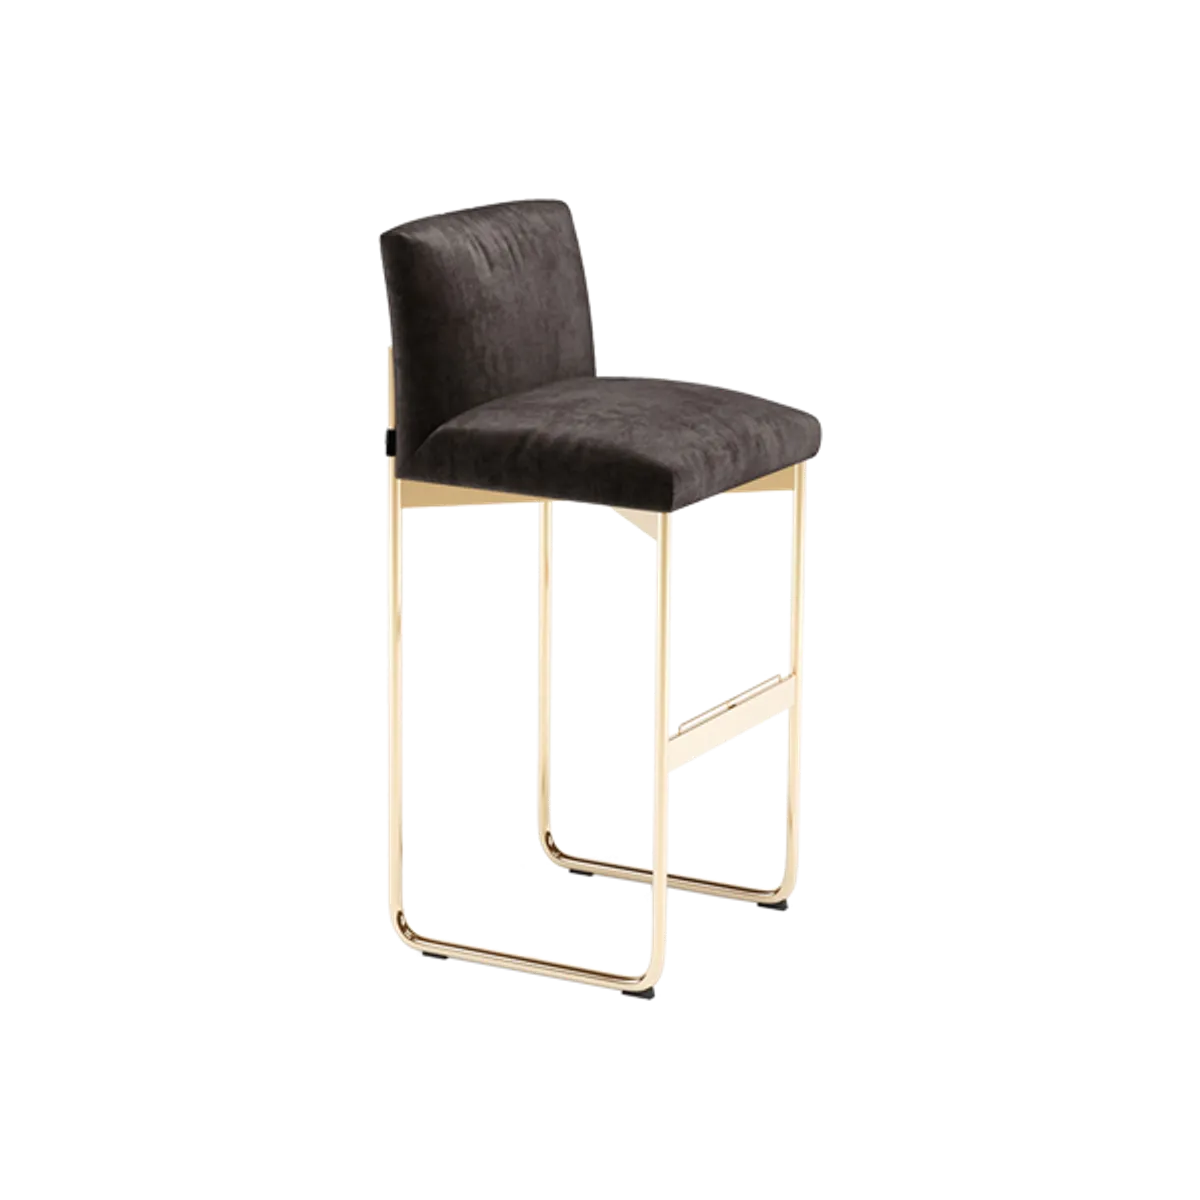 Web Gala Bar Stool Brass And Black Inside Out Contracts